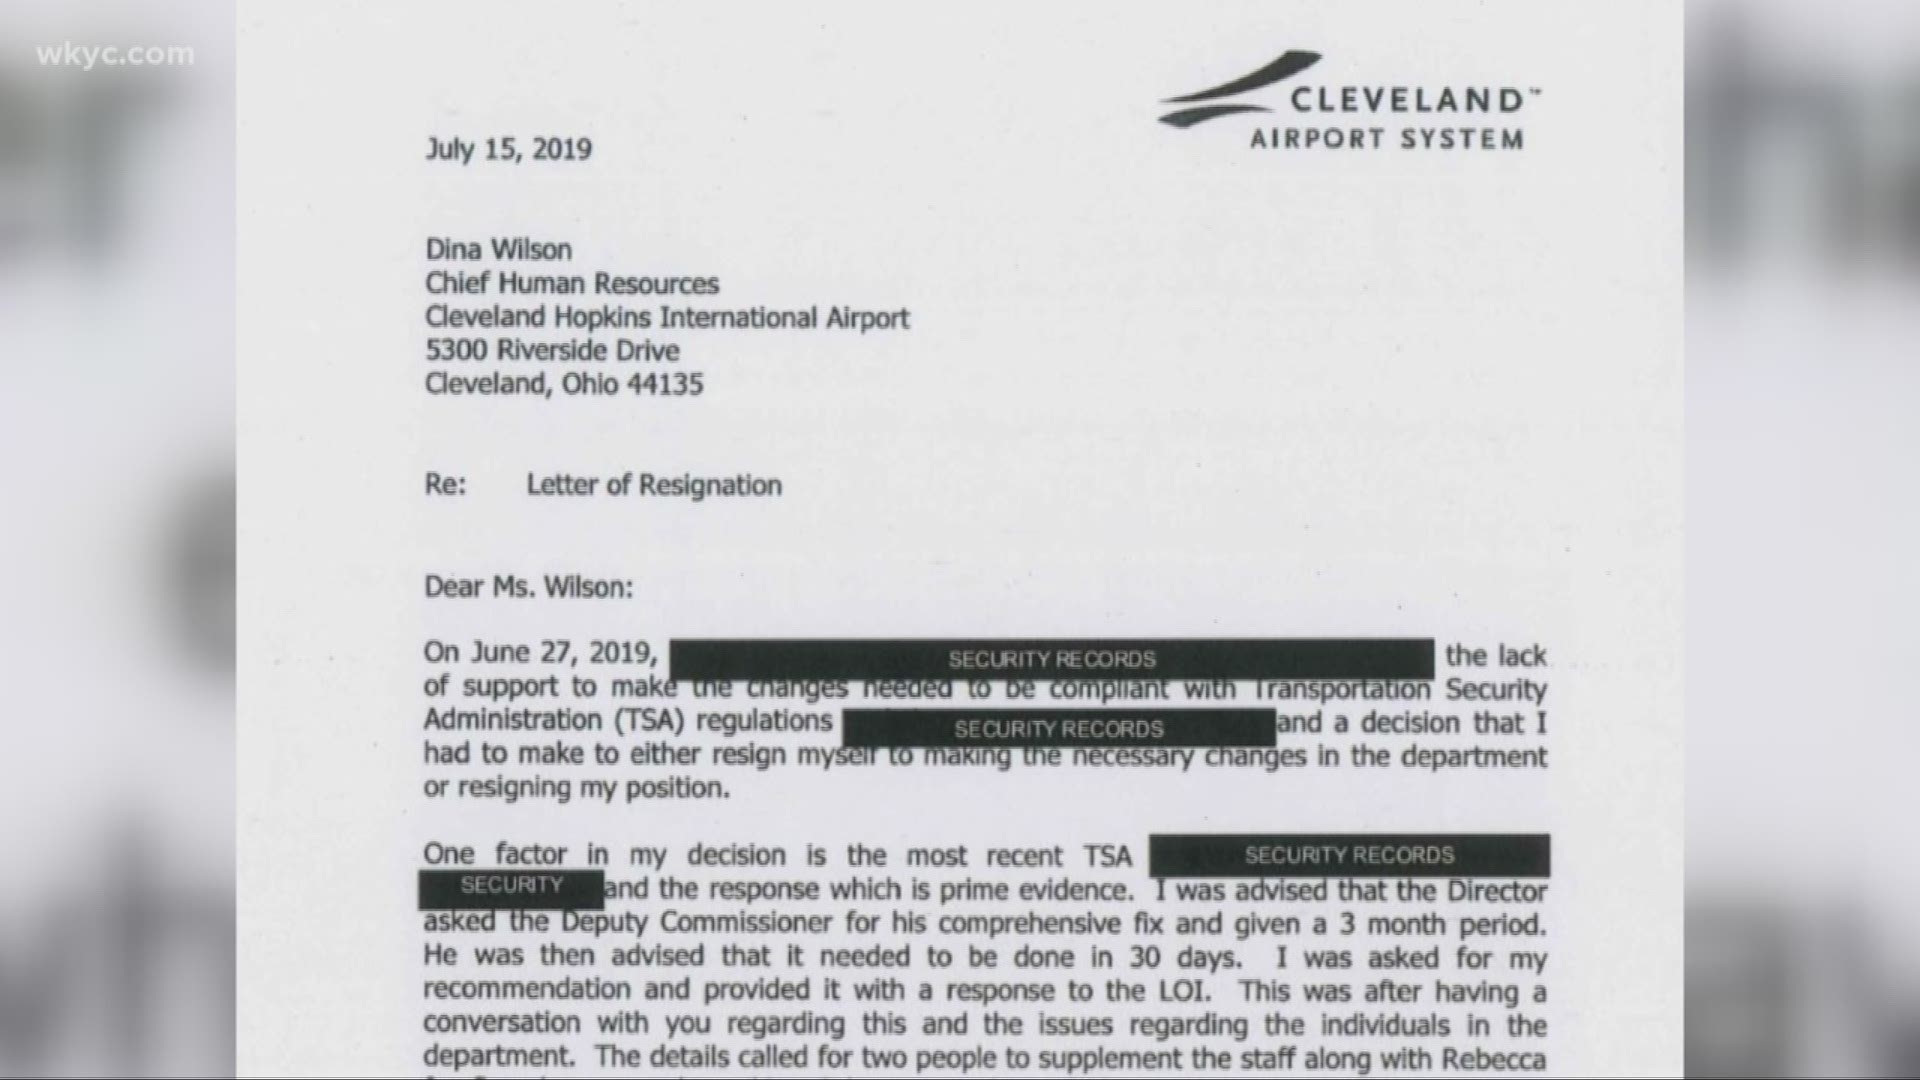 The letter cites a “lack of support to make changes needed to be compliant with Transportation Security Administration (TSA) regulations.”